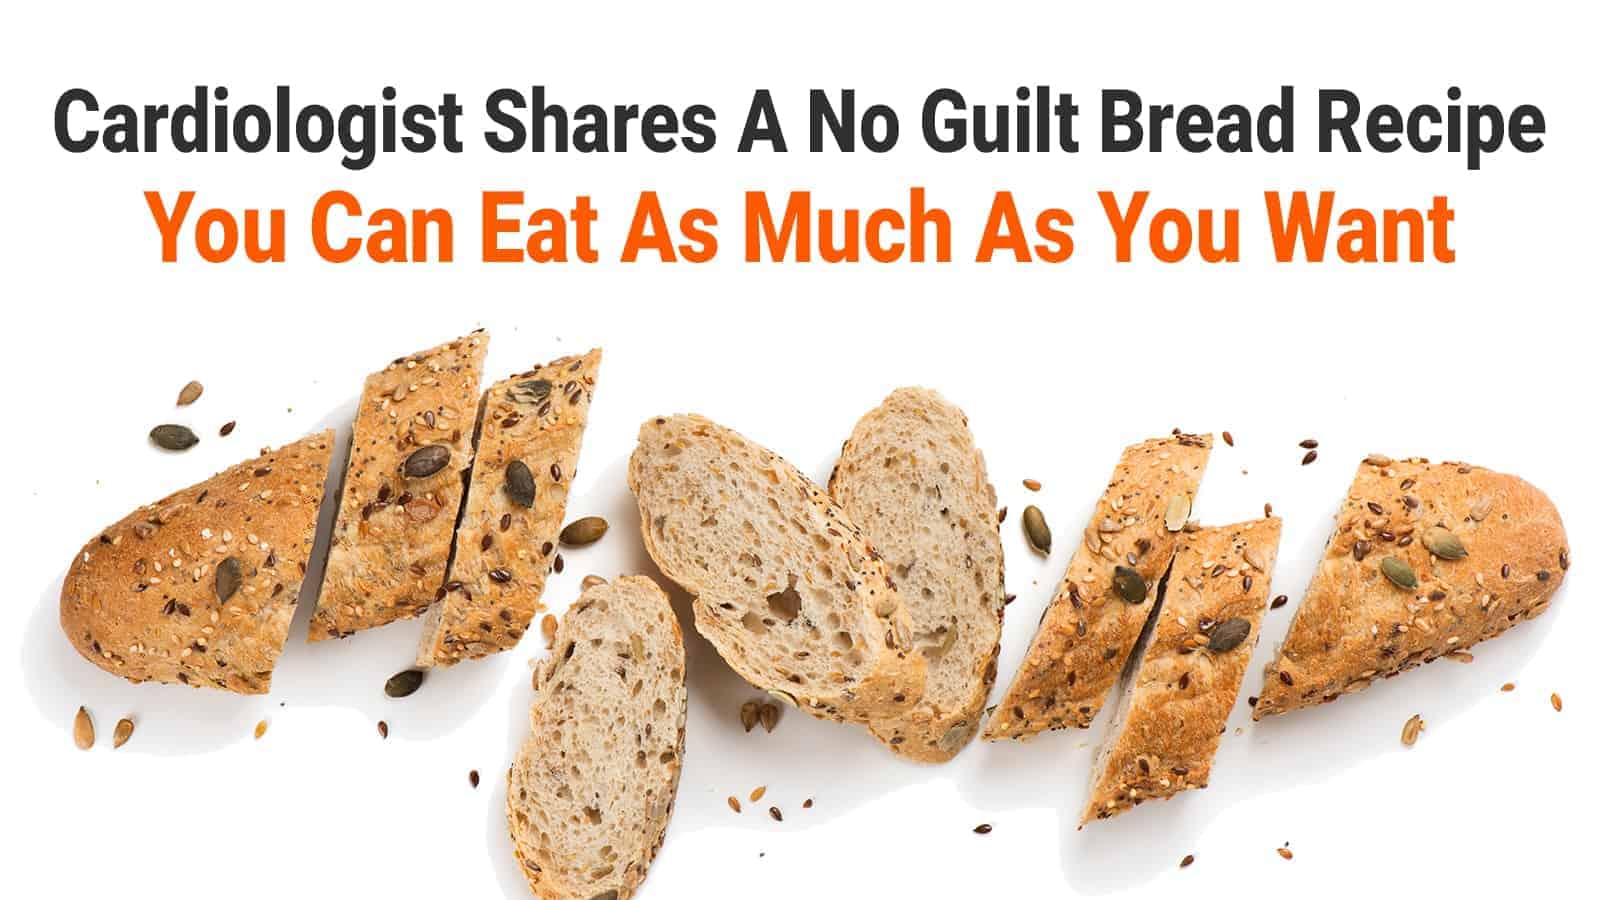 Cardiologist Shares A No Guilt, Gluten Free Bread Recipe You Can Eat As Much As You Want